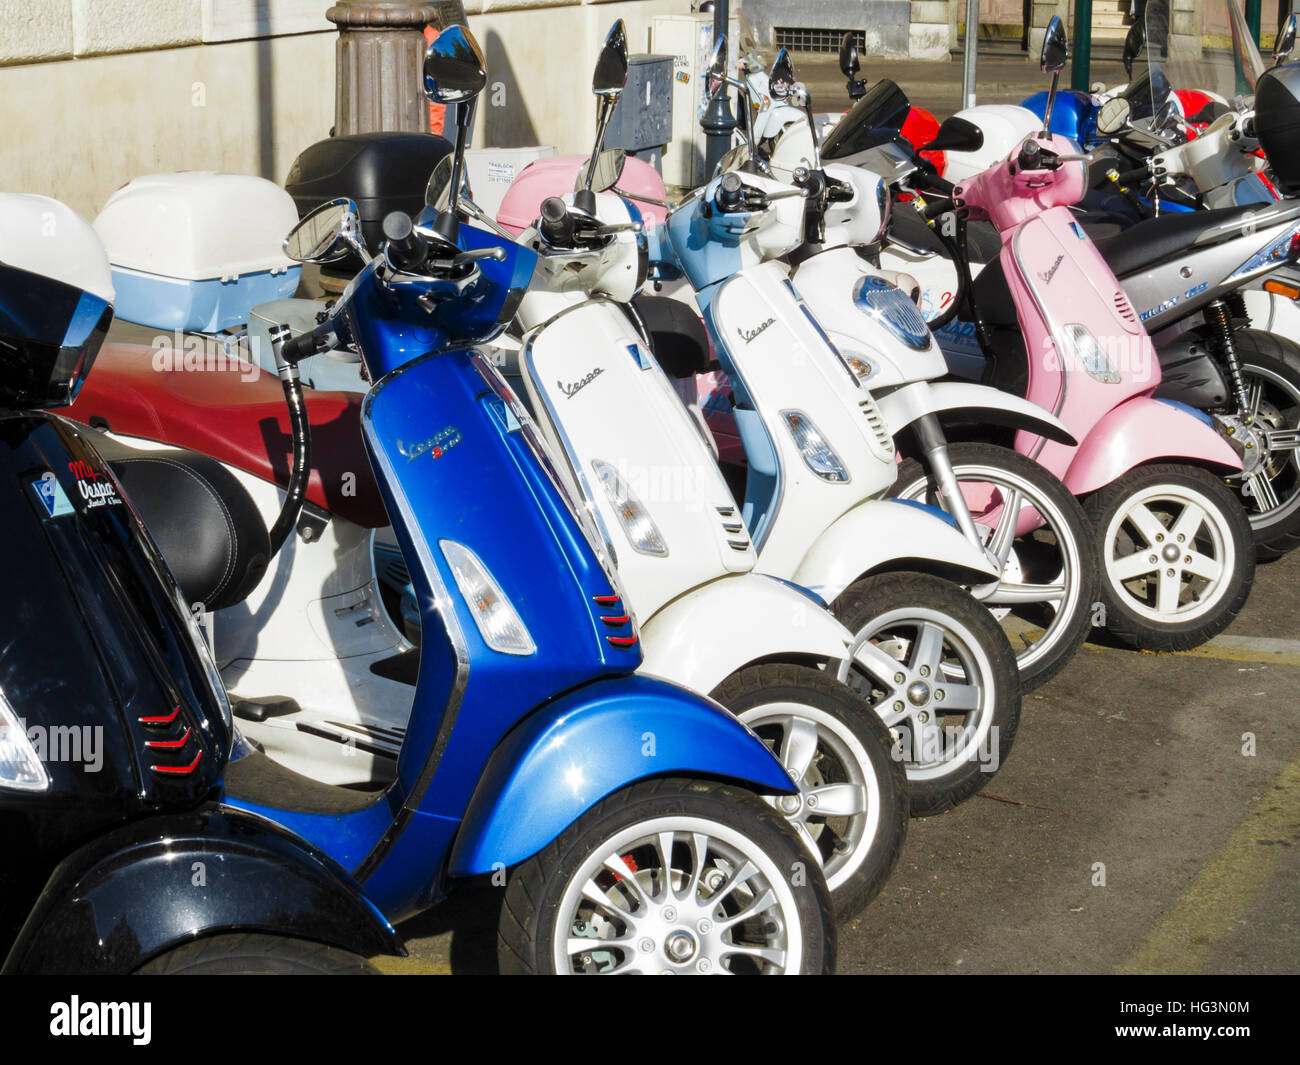 Rental Vespa Scooters In Rome Italy Stock Photo 130389412